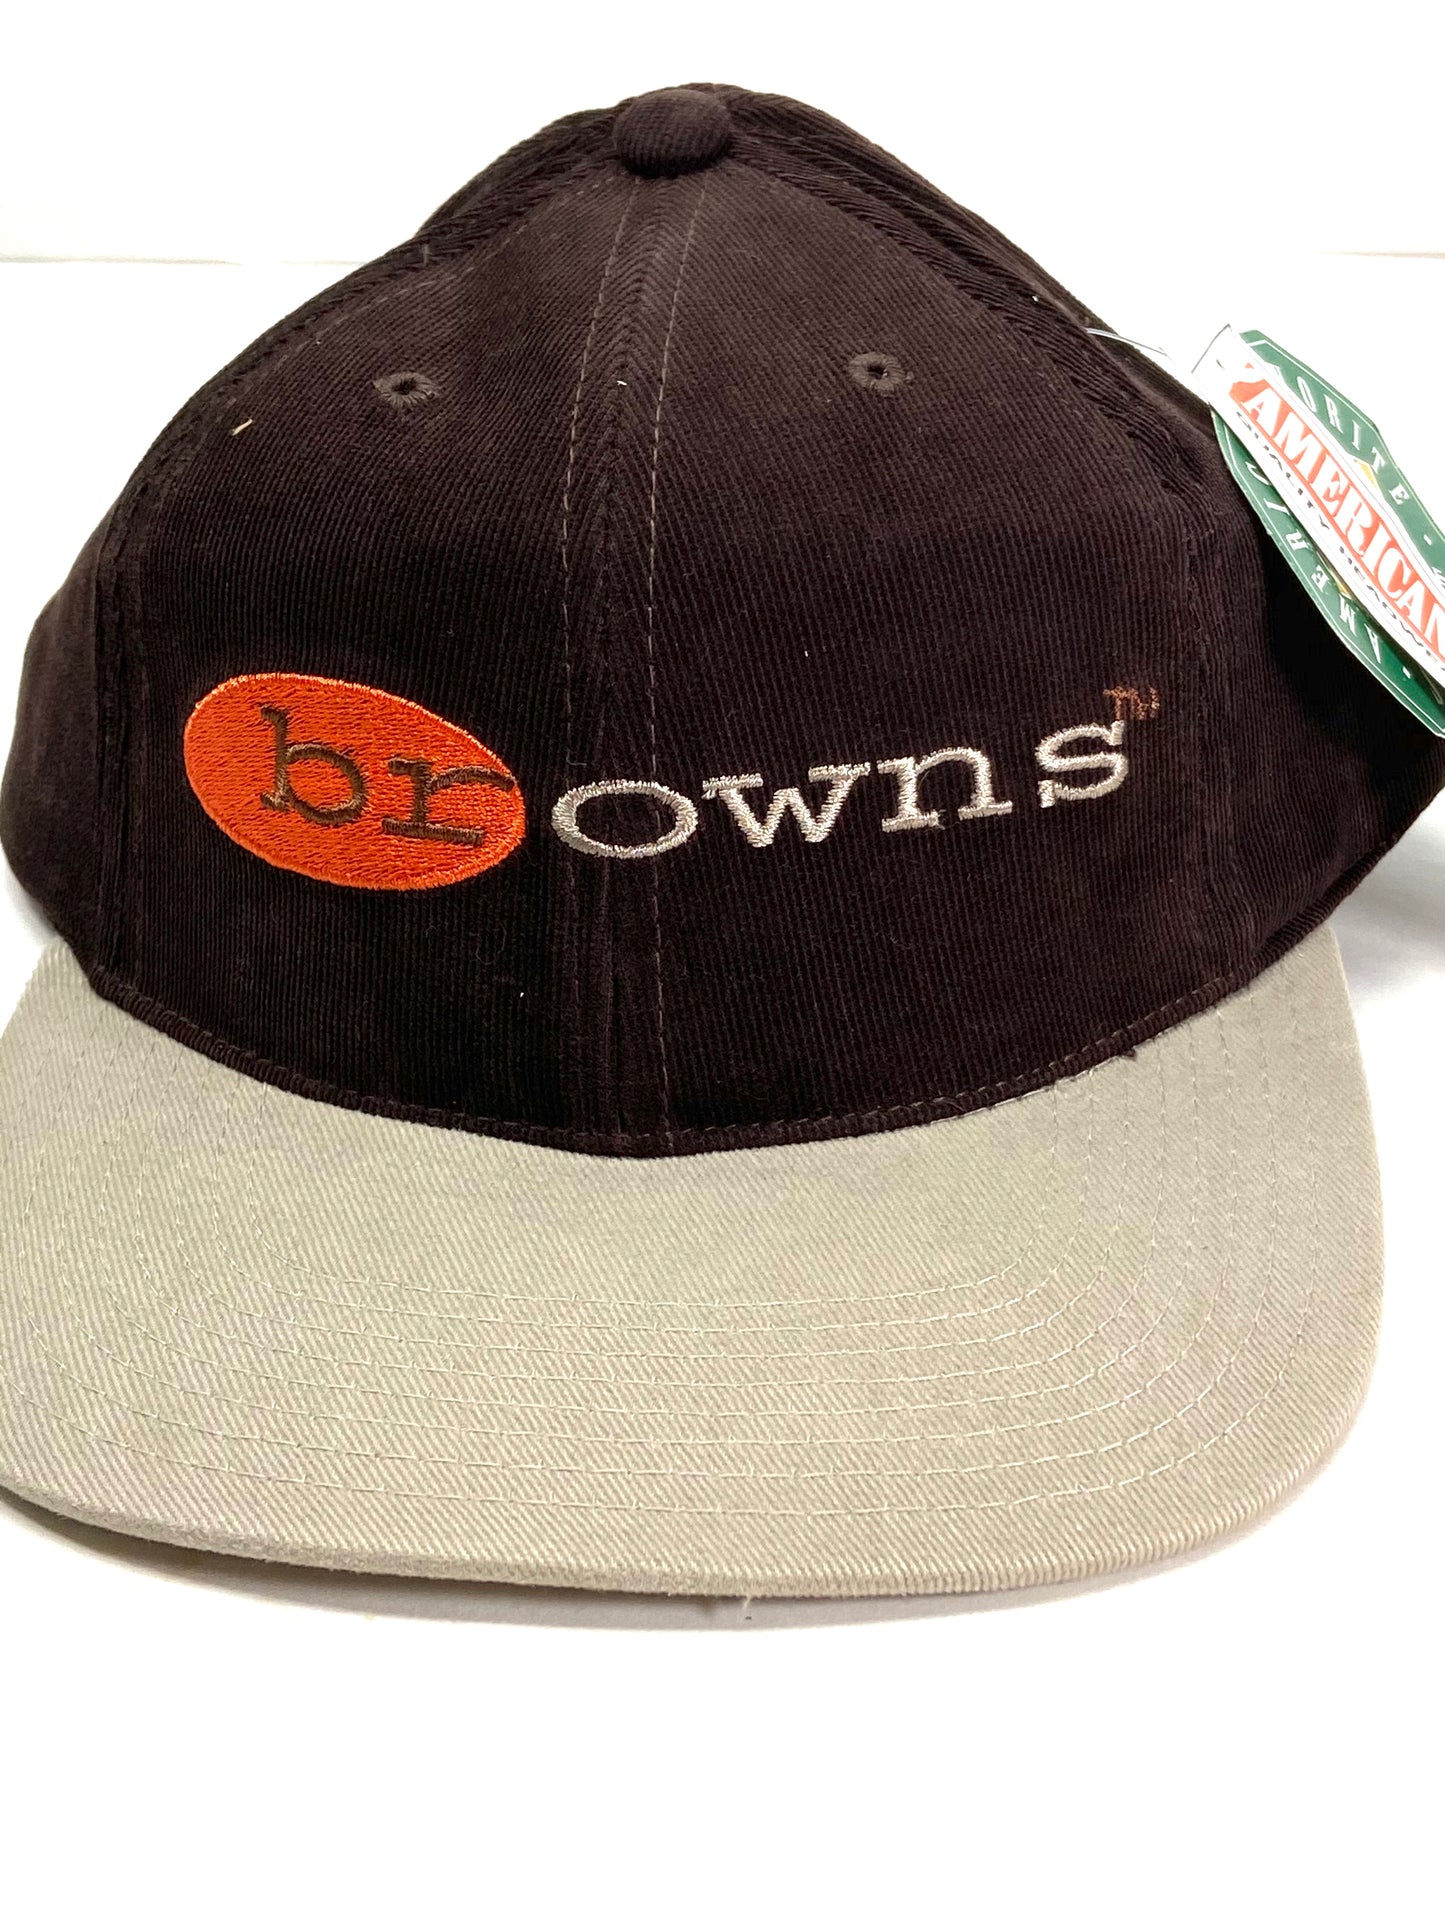 Cleveland Browns Vintage Late '90's NFL Brown Corduroy Cap by American Needle